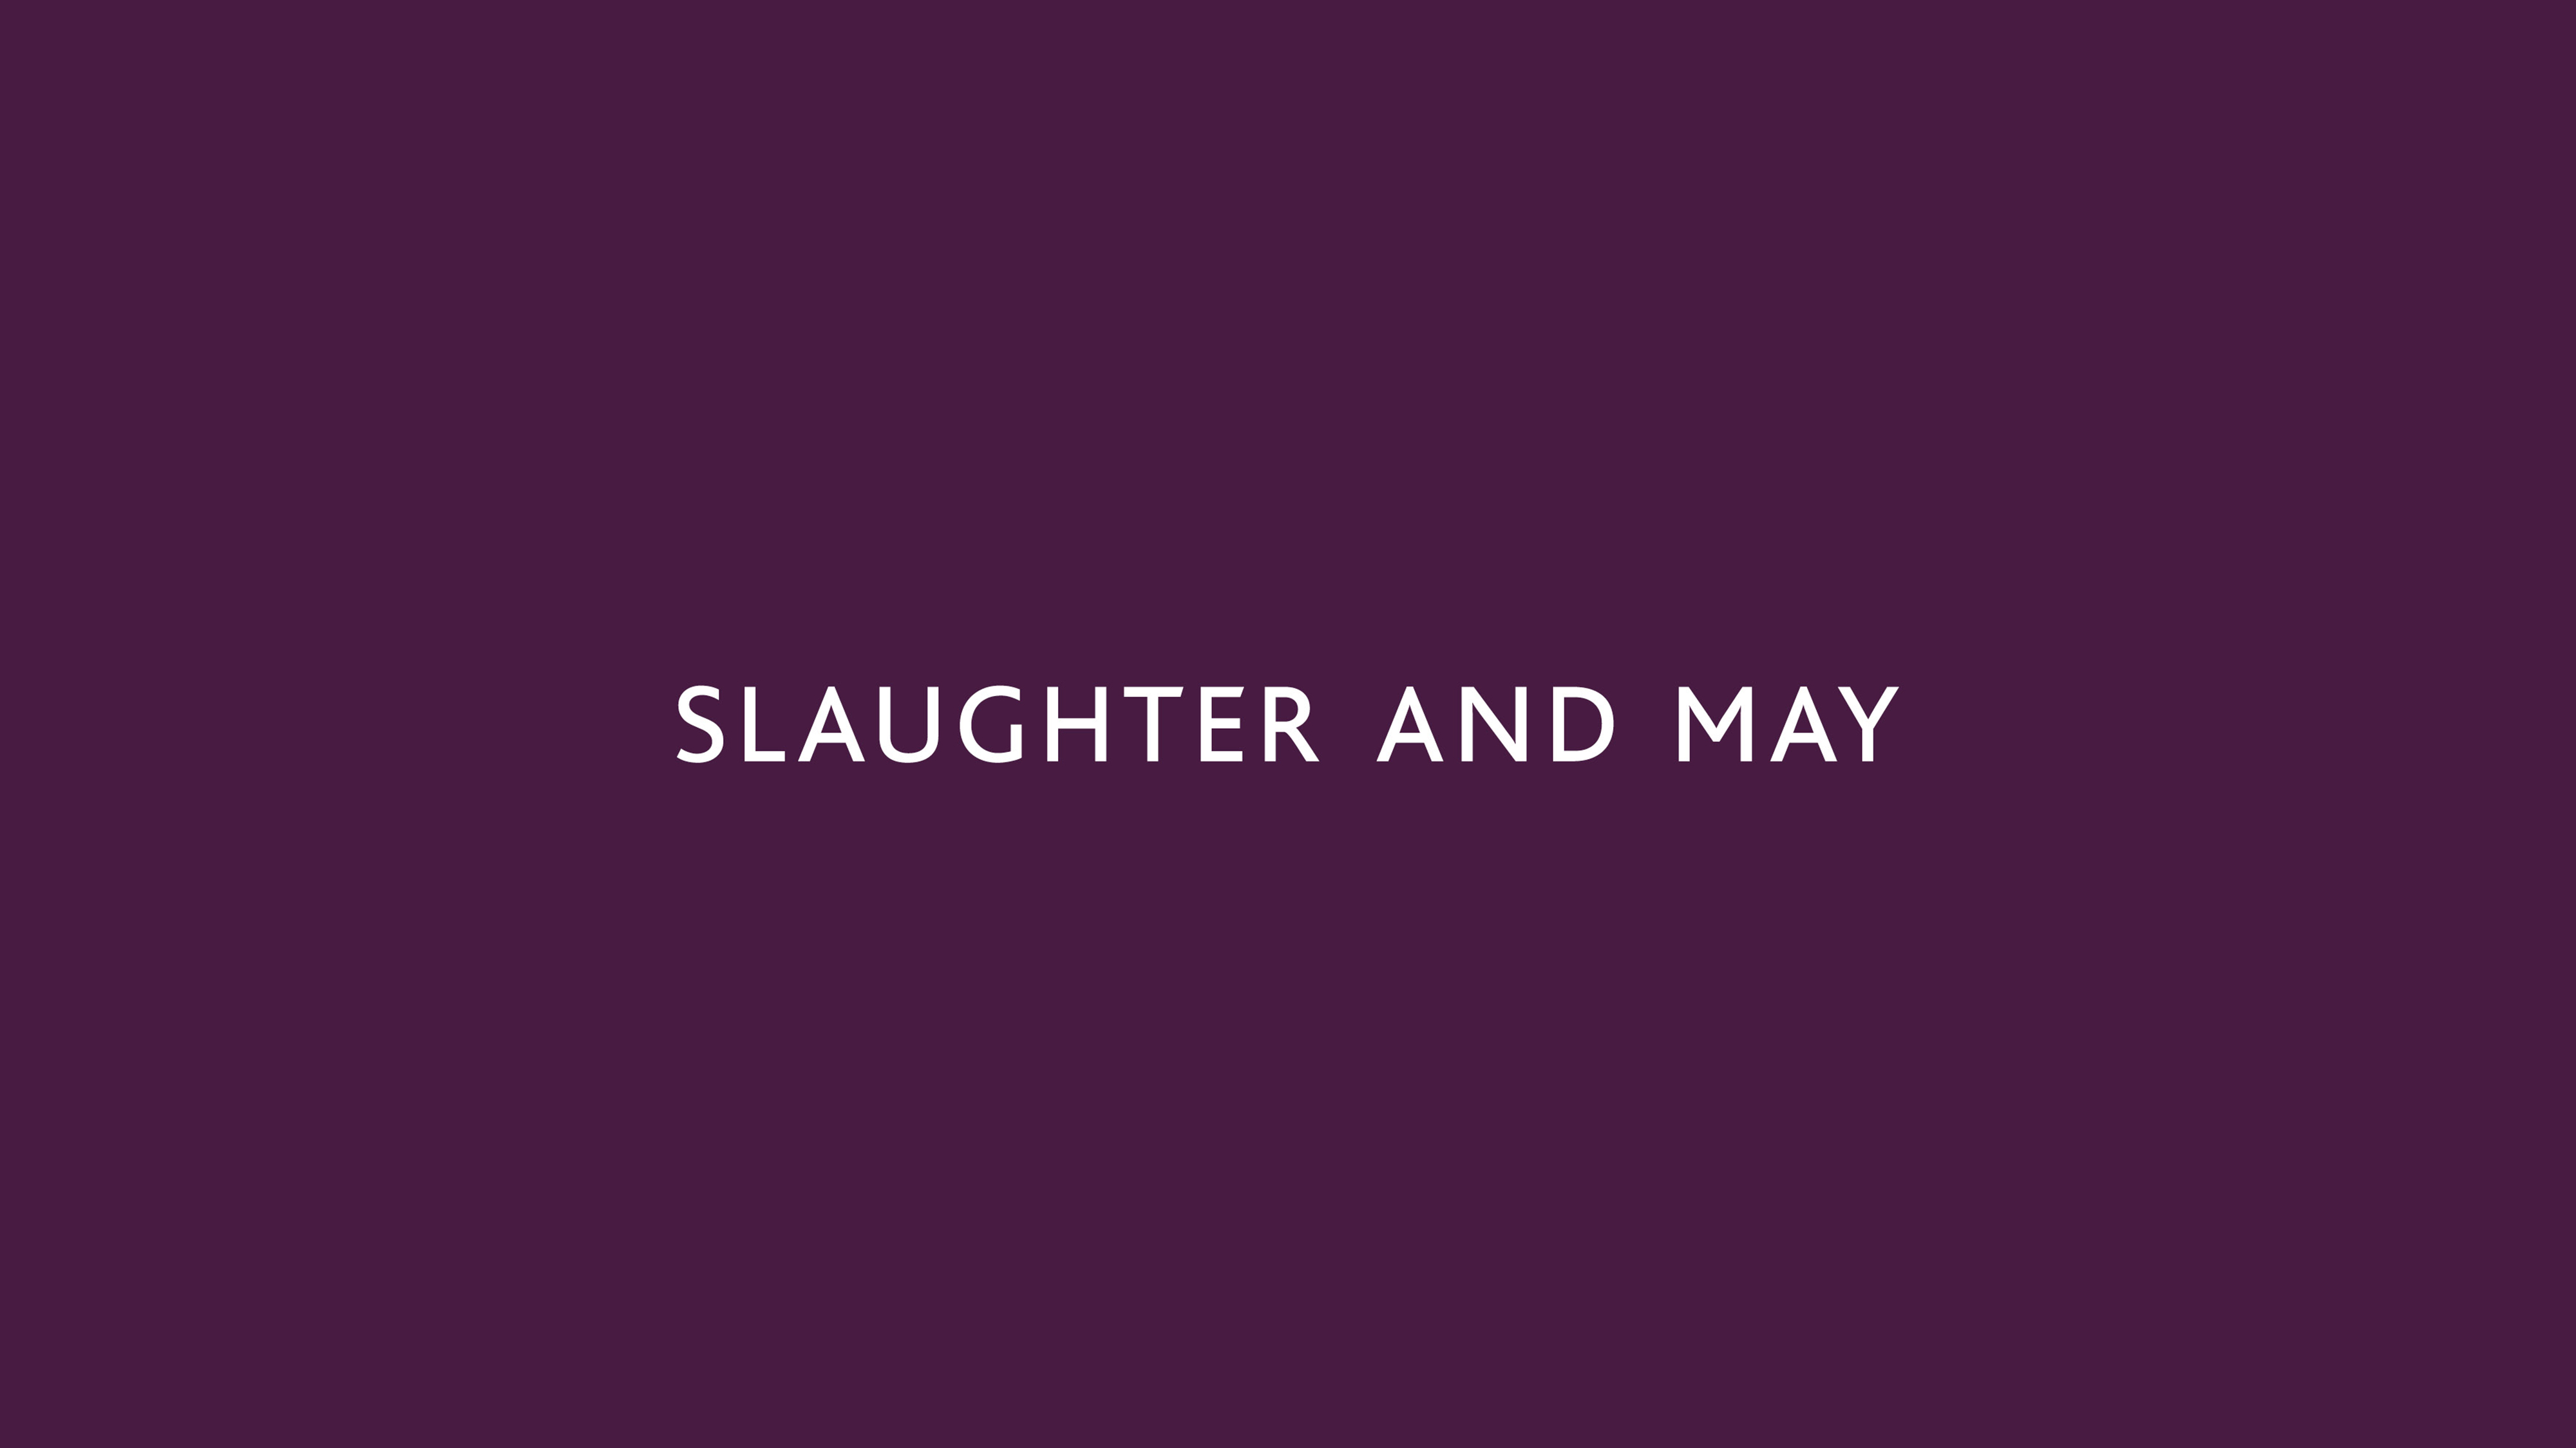 Slaughter and May Opportunities | Oxford Law Faculty